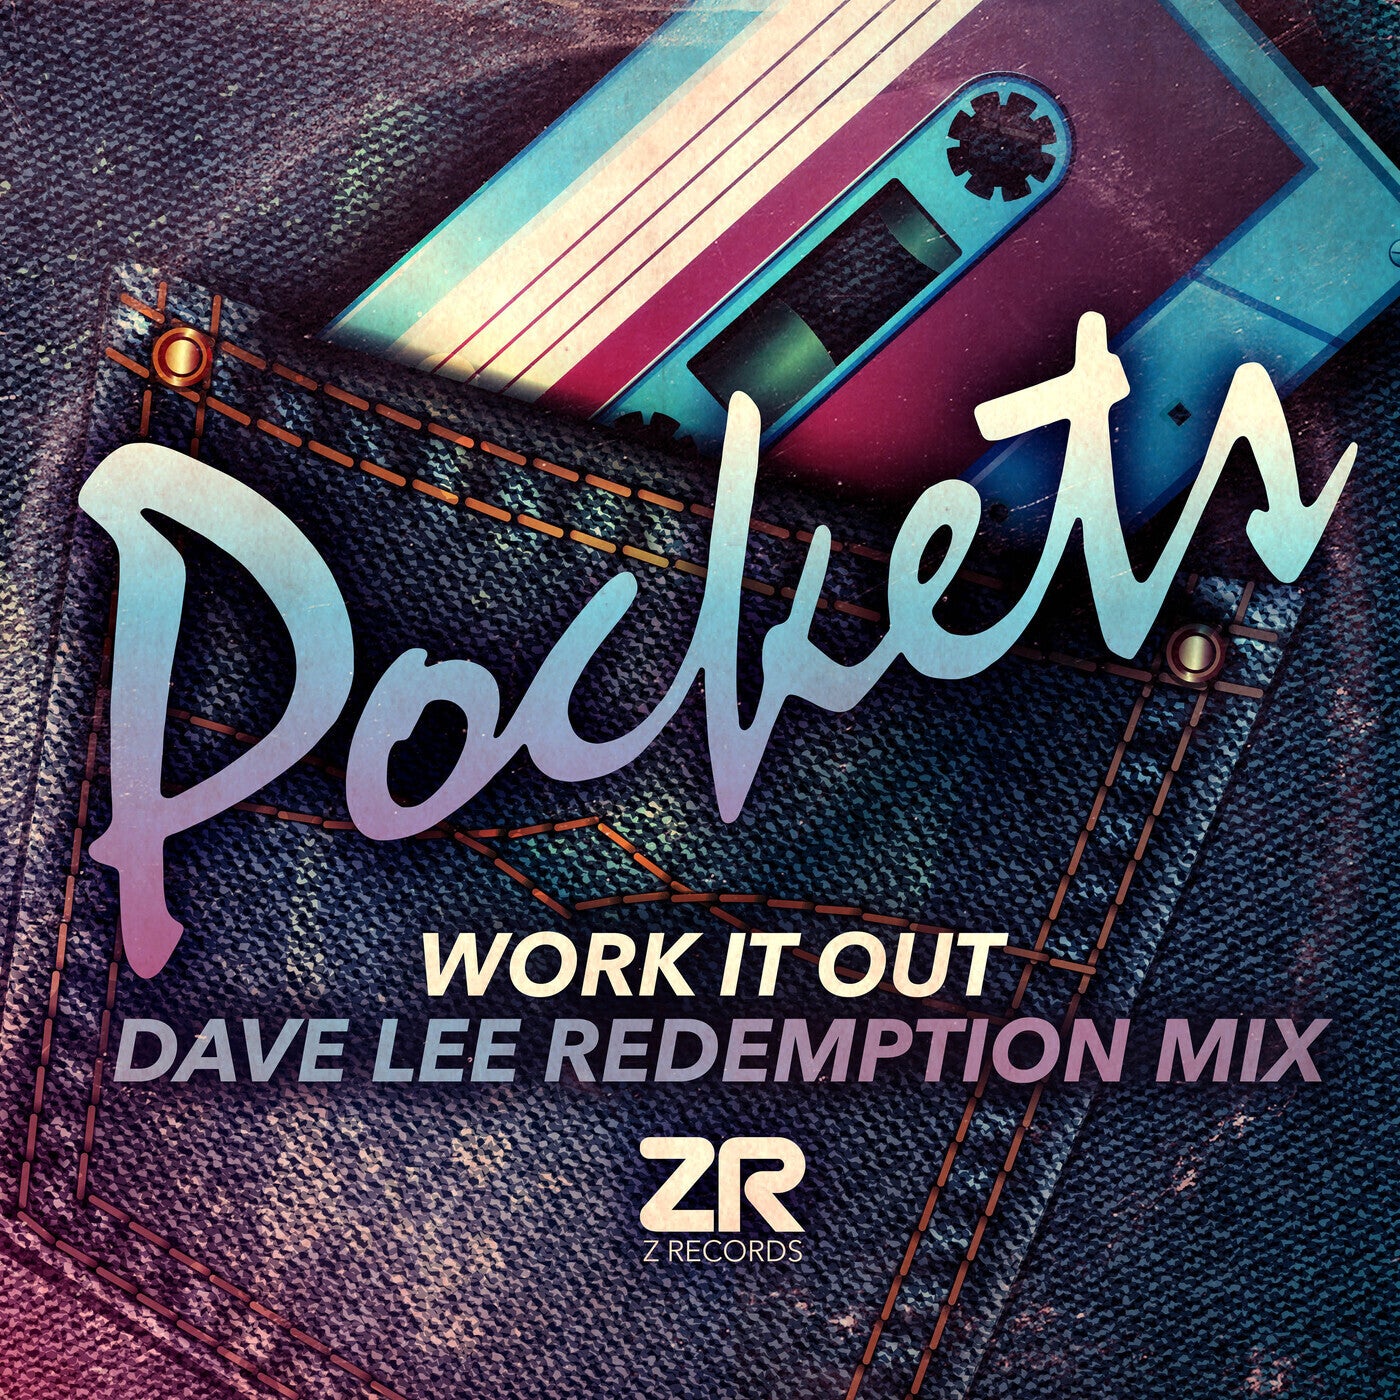 Download Pockets  - Work It Out (Dave Lee Redemption Mix) on Electrobuzz